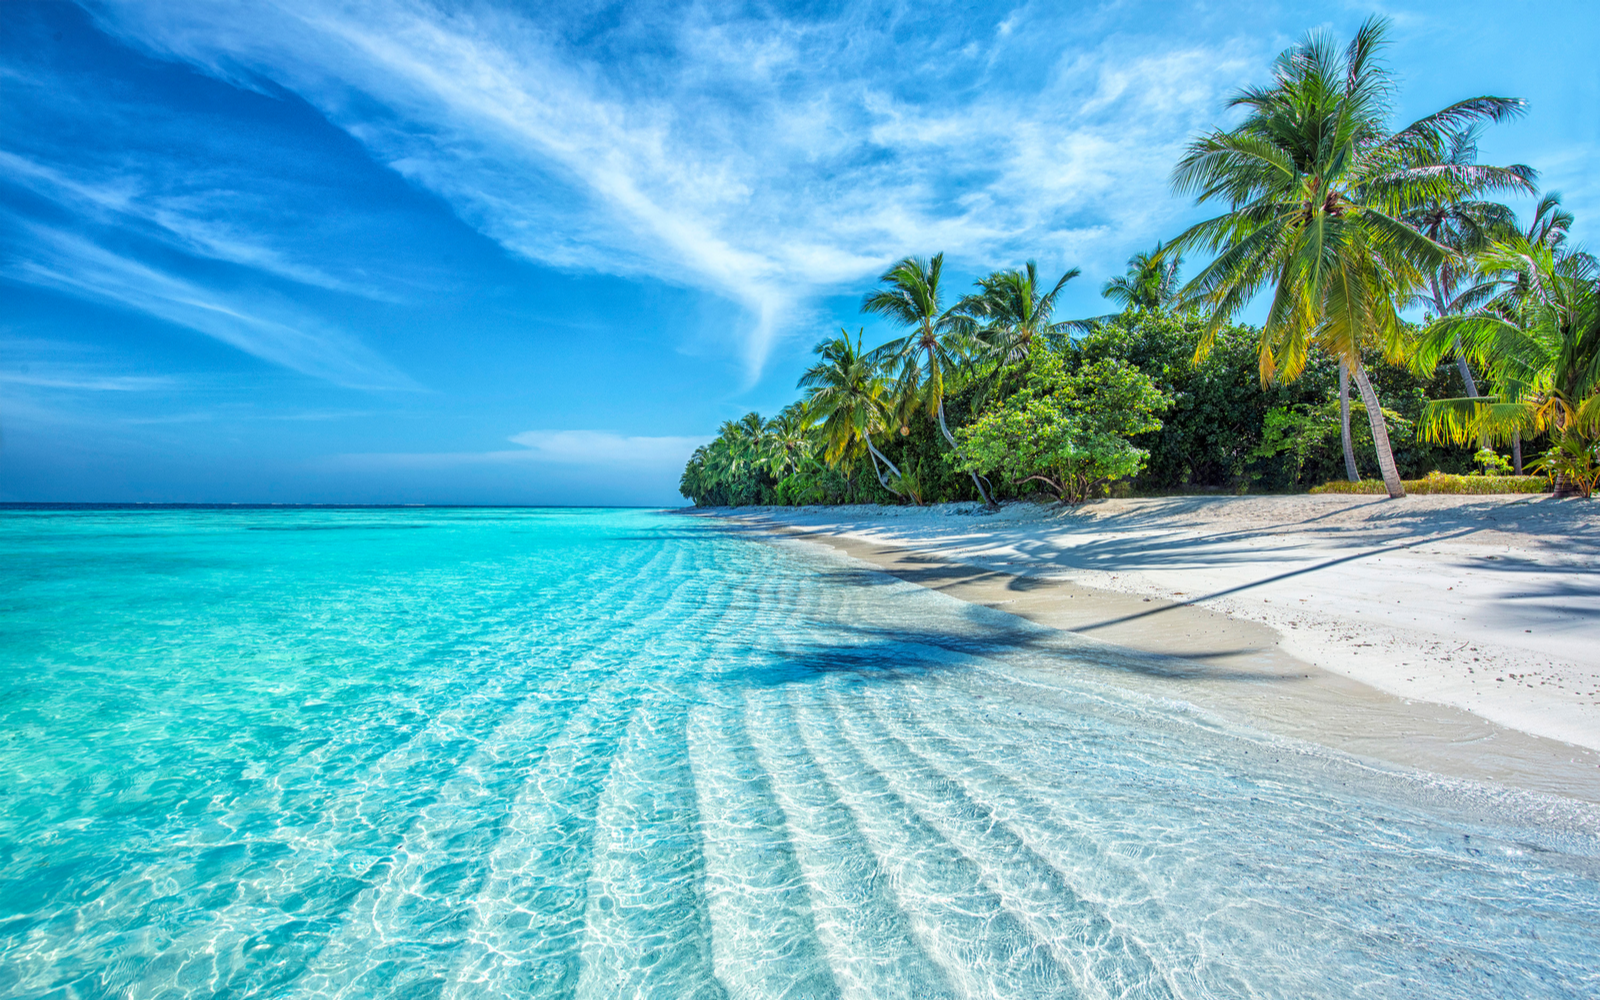 Gorgeous view of the Maldives, one of the best island vacations, pictured with rippling waves on the beach